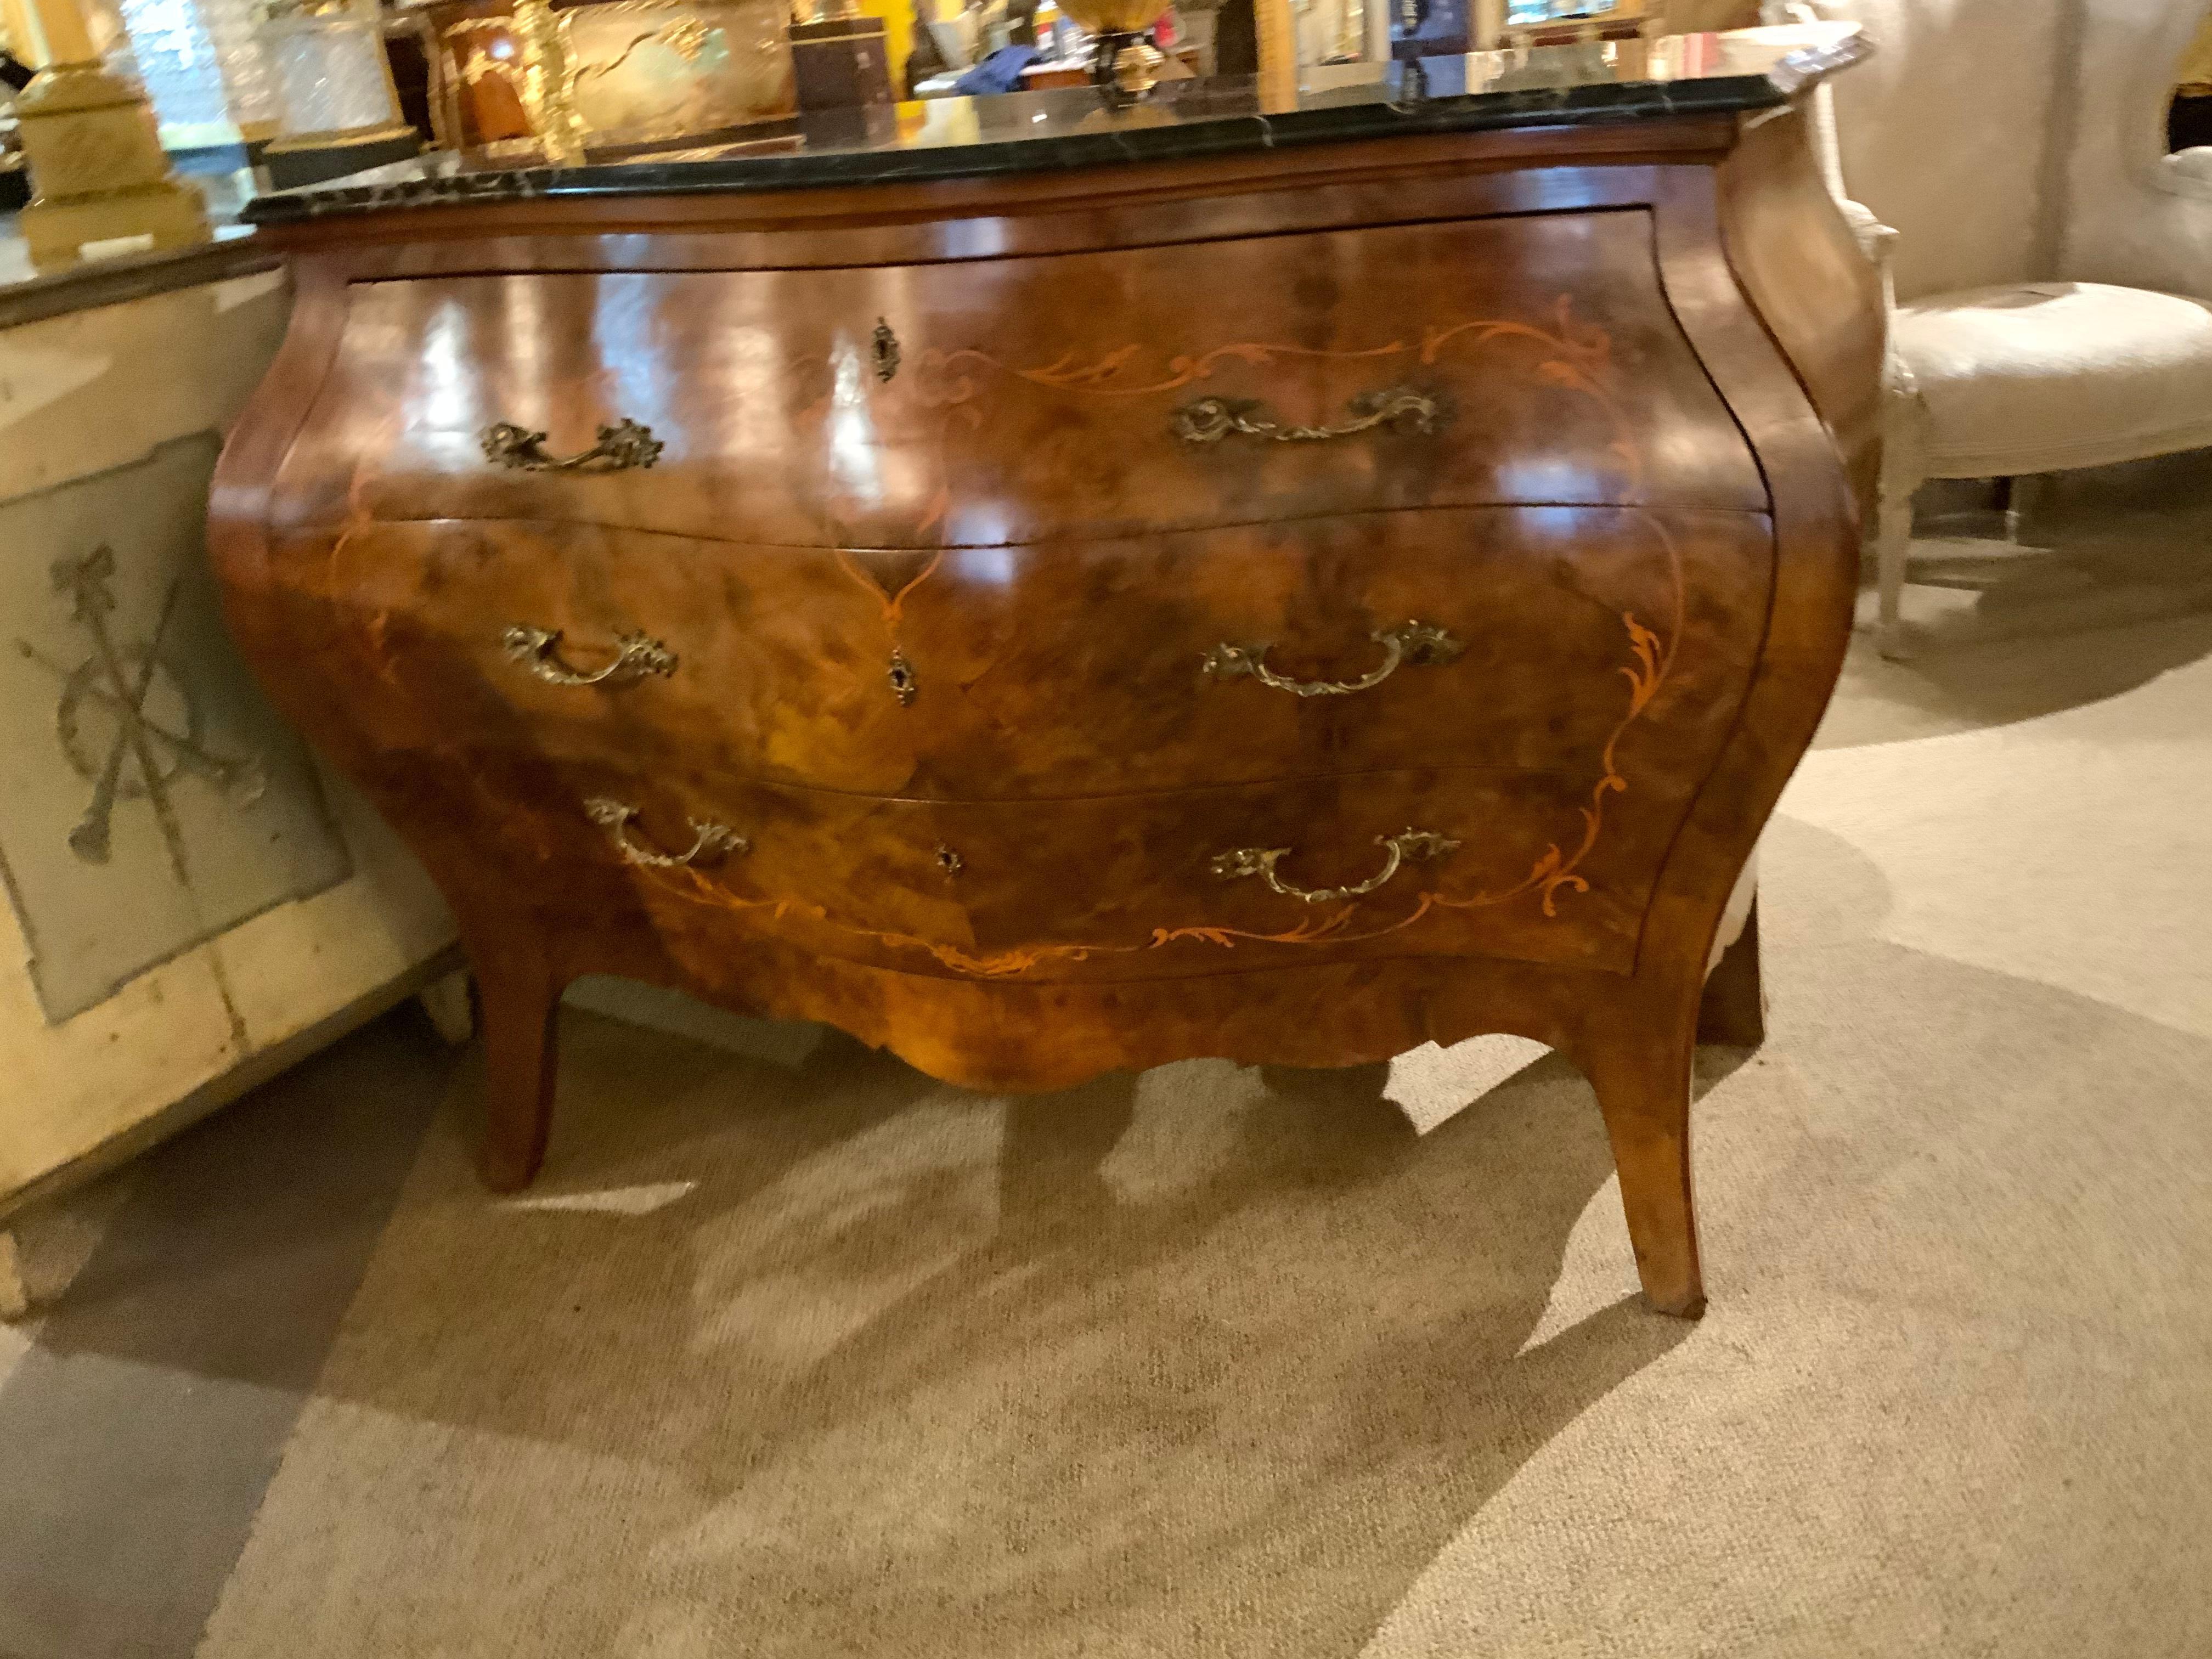 Burled wood in a soft warm hue makes this piece exceptional
The graceful curves of this bombe form add to the 
Beauty of this commode. Scroll work design in a marquetry 
Inlay further adds to the overall design of this commode.
A marble top that